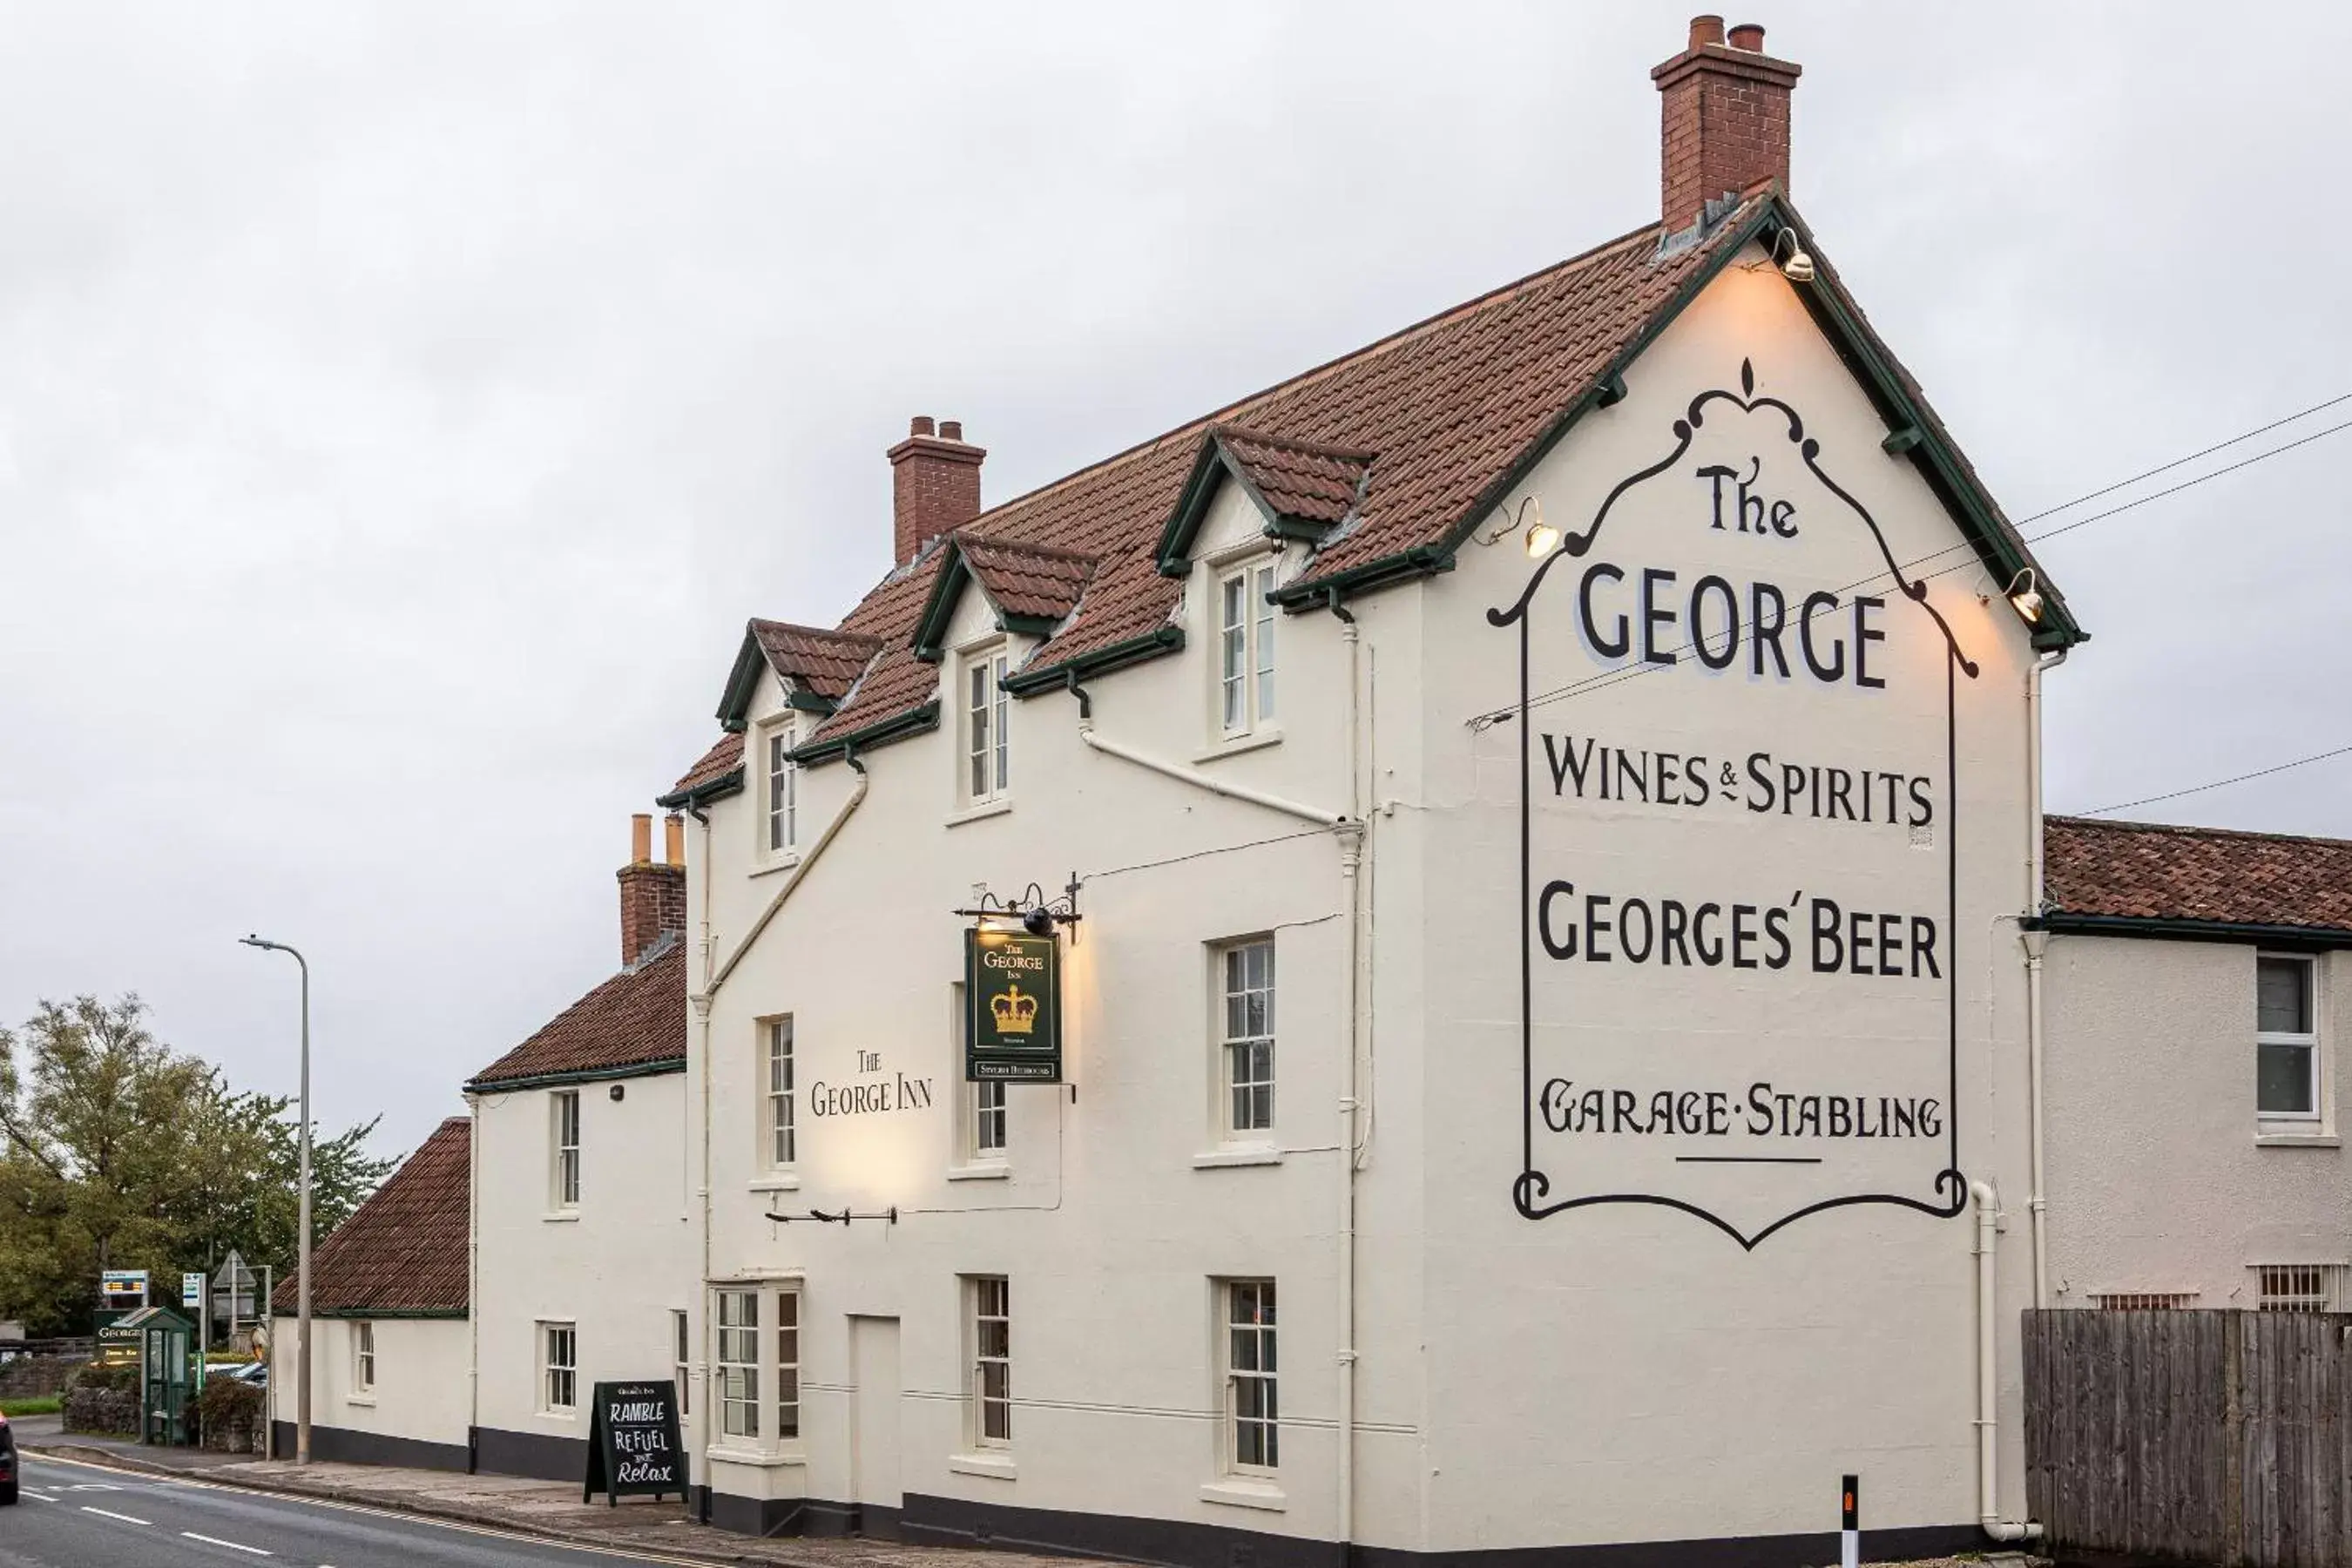 Property Building in The George at Backwell